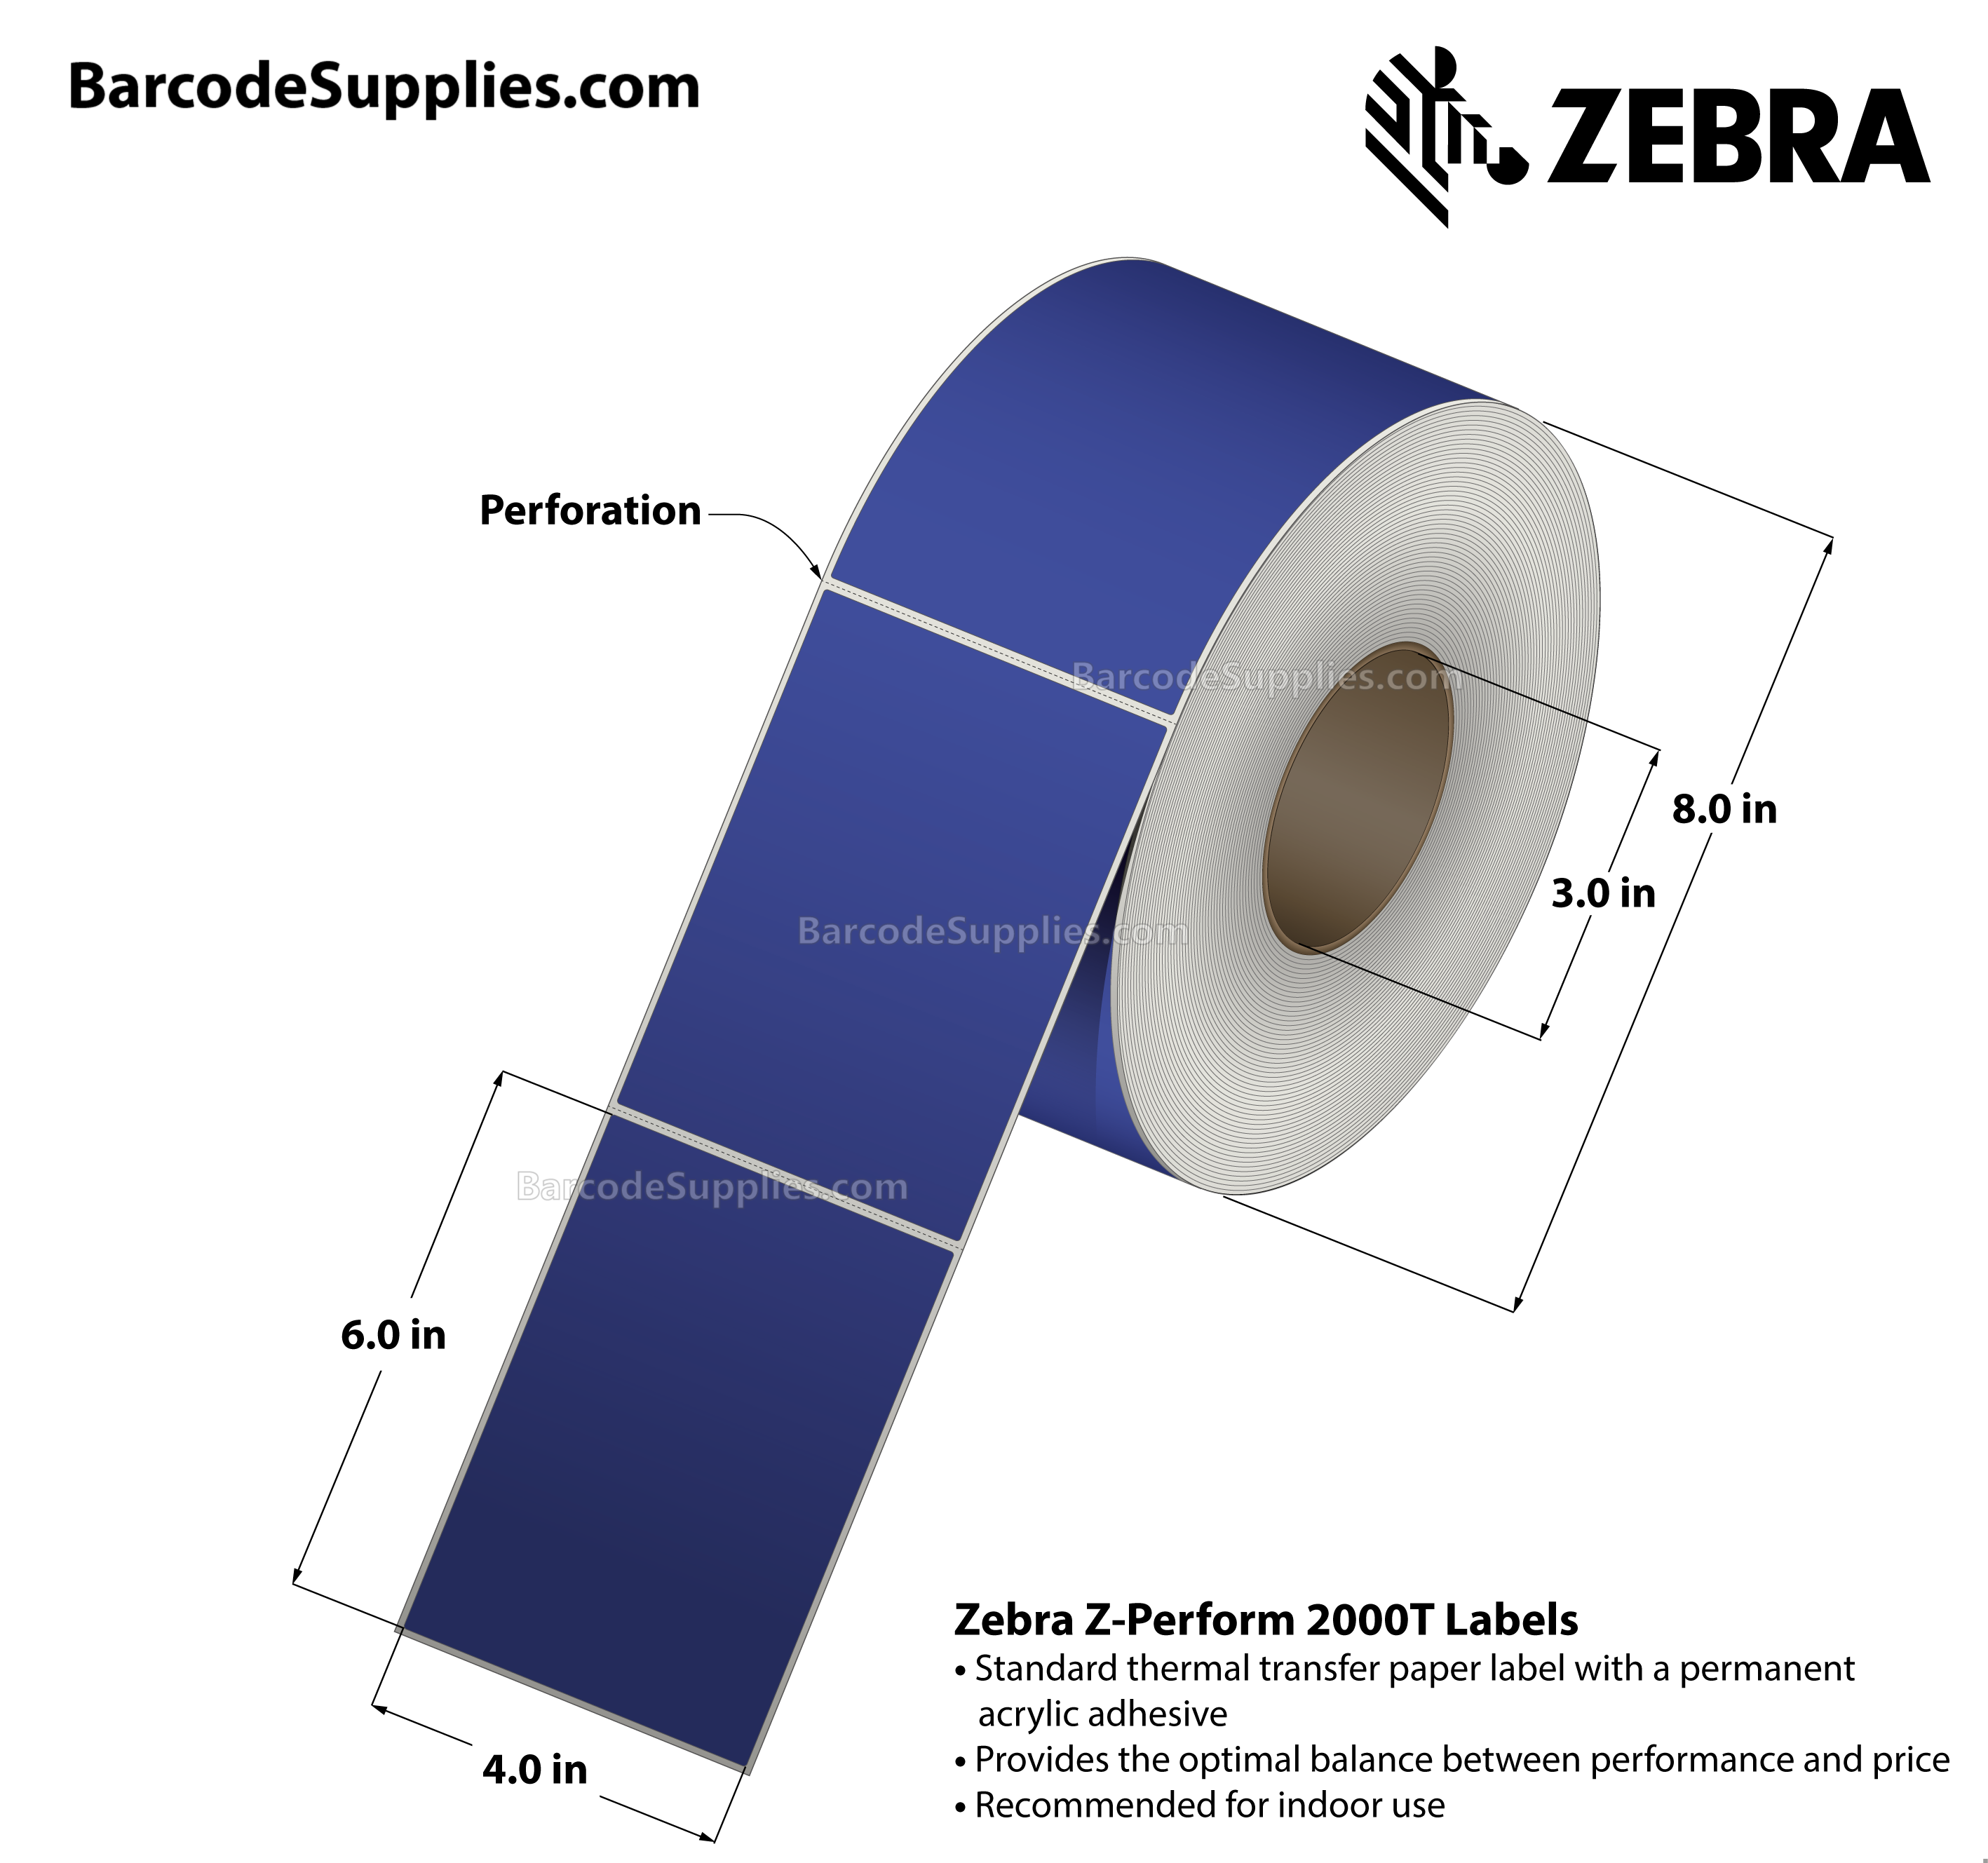 4 x 6 Thermal Transfer Blue Z-Perform 2000T Floodcoated (Blue) Labels With Permanent Adhesive - Perforated - 1000 Labels Per Roll - Carton Of 4 Rolls - 4000 Labels Total - MPN: 10006208